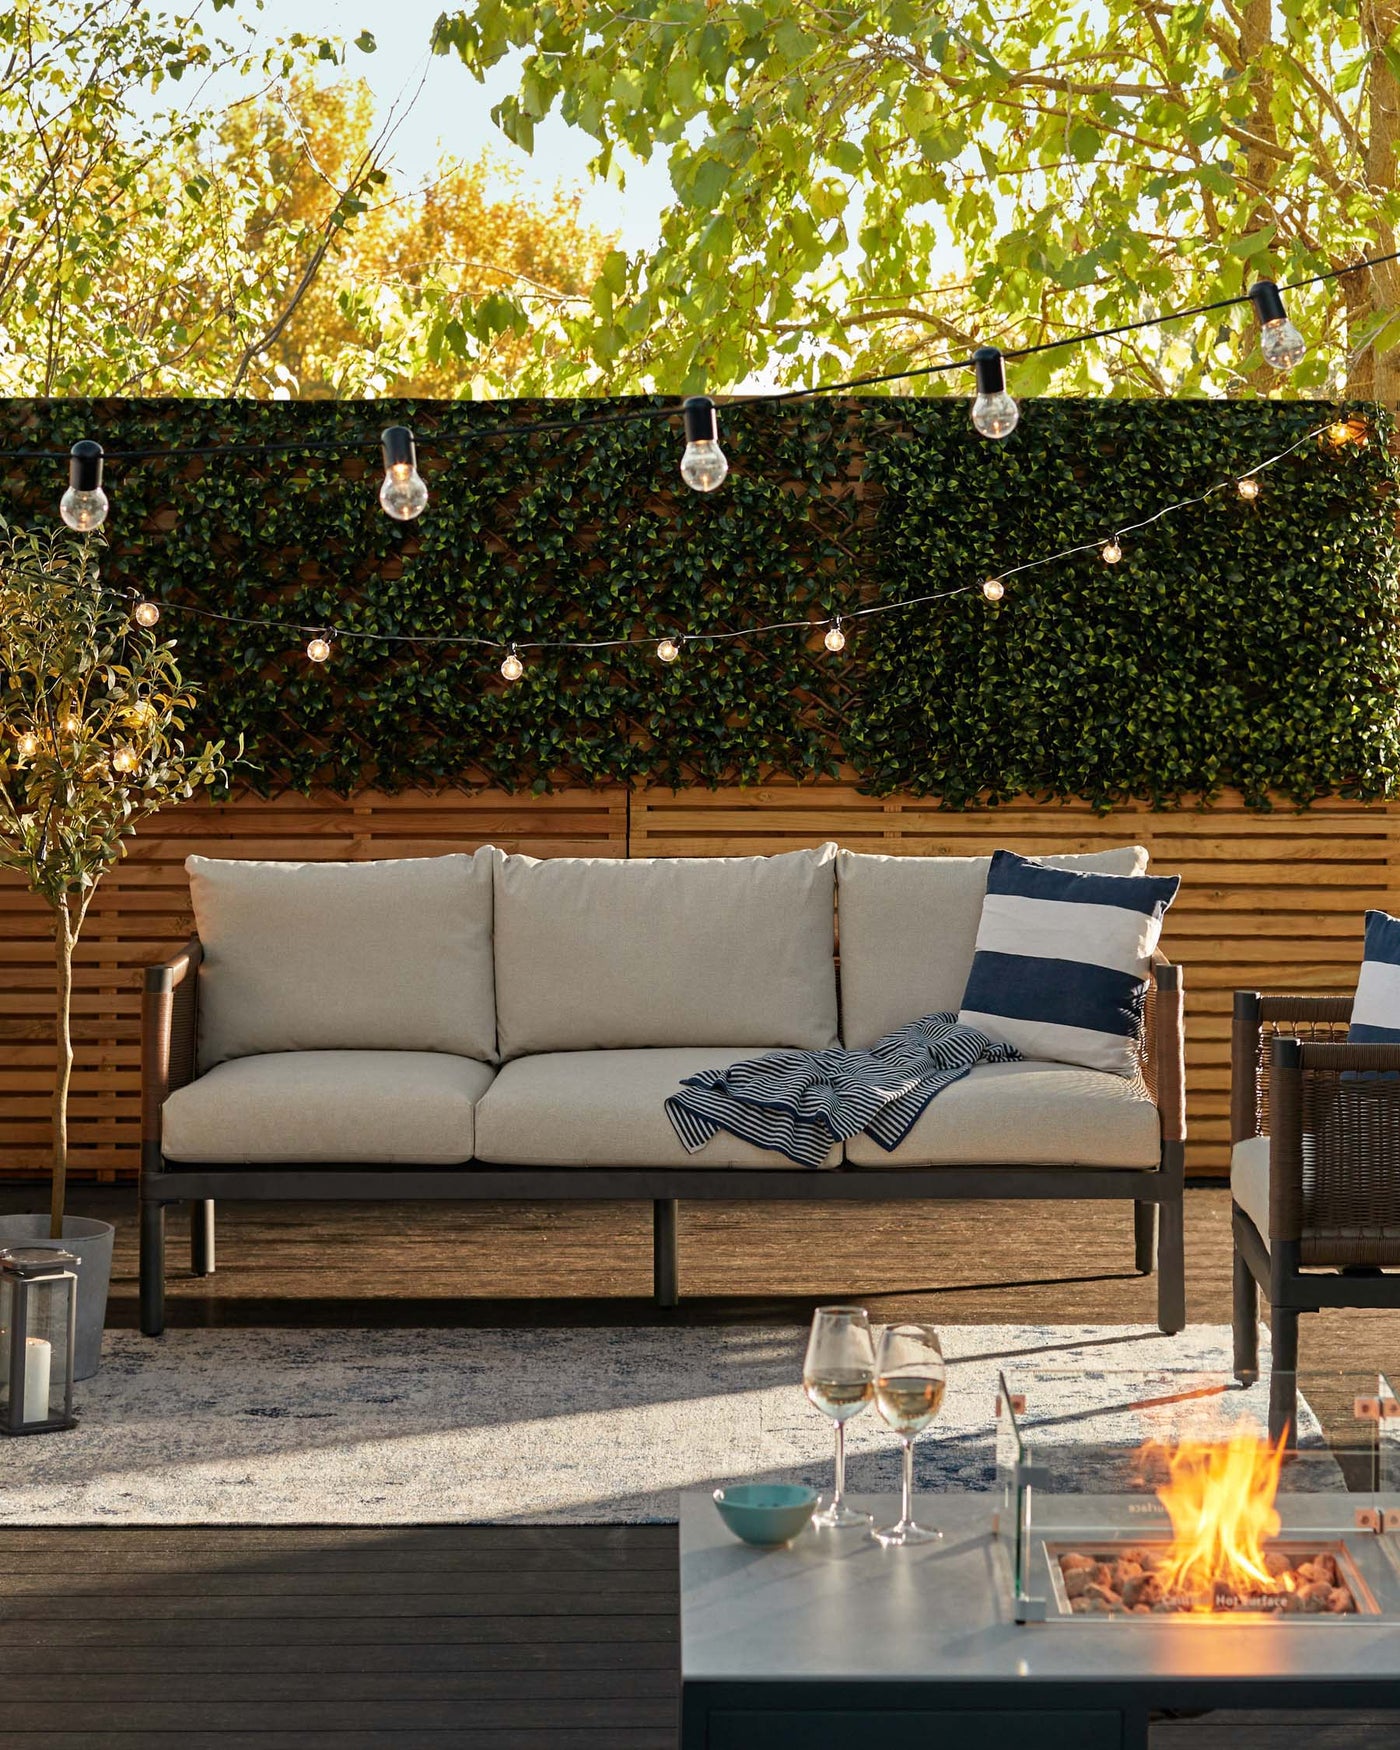 Modern outdoor furniture on a patio, including a sleek wood-frame sofa with plush beige cushions and throw pillows, a rectangular fire pit table with a glass barrier around the flame, and a matching dark grey armchair with similar cushion styling. Decorative string lights hang overhead, and the setting is complemented by a textured area rug under the sofa.